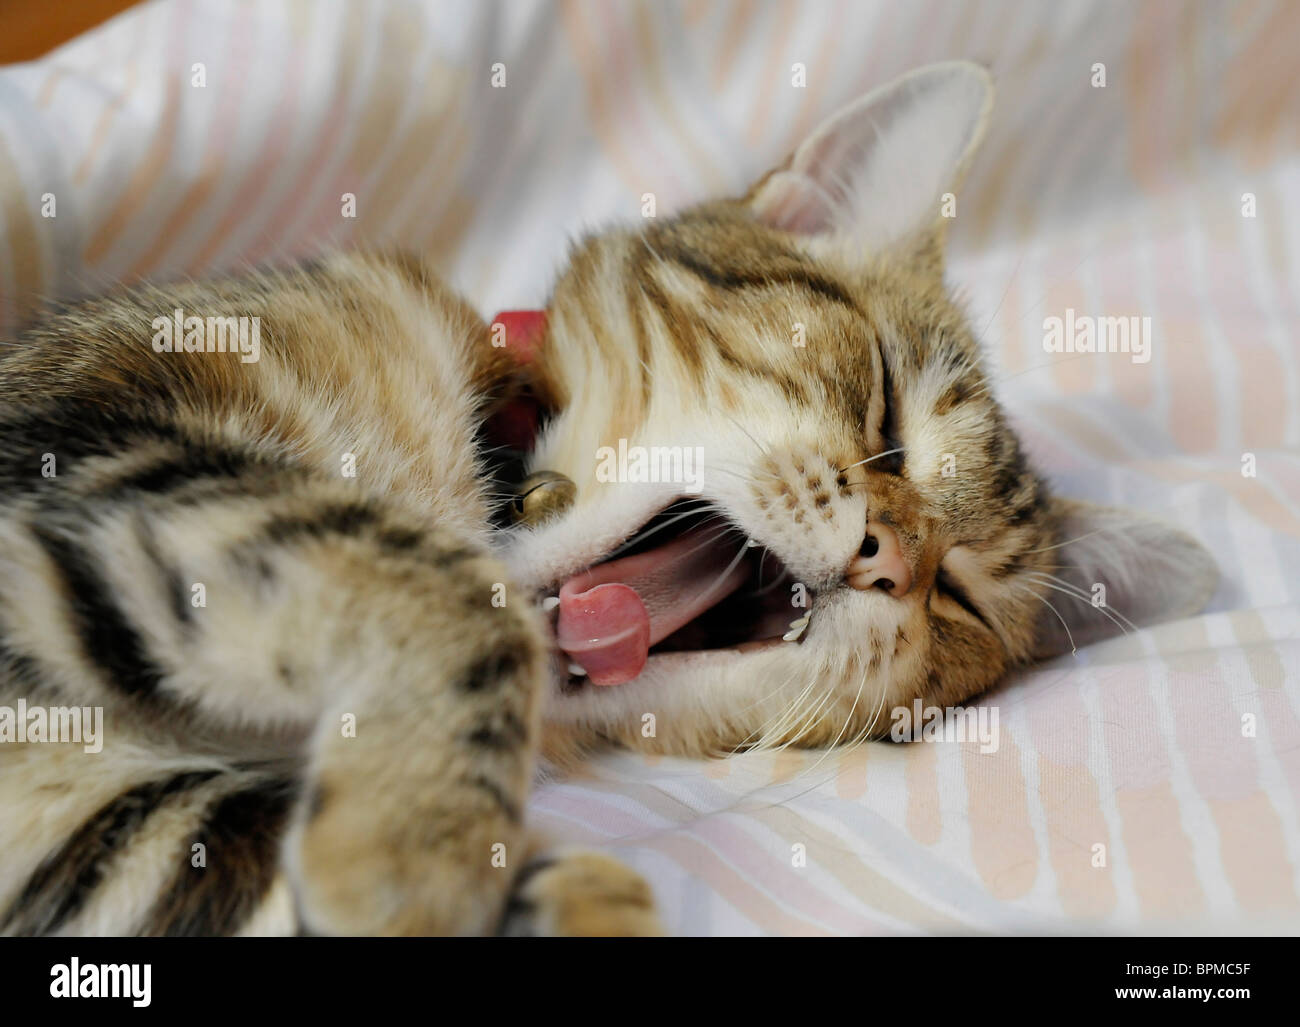 Funny animals young tabby cat sleeping Stock Photo